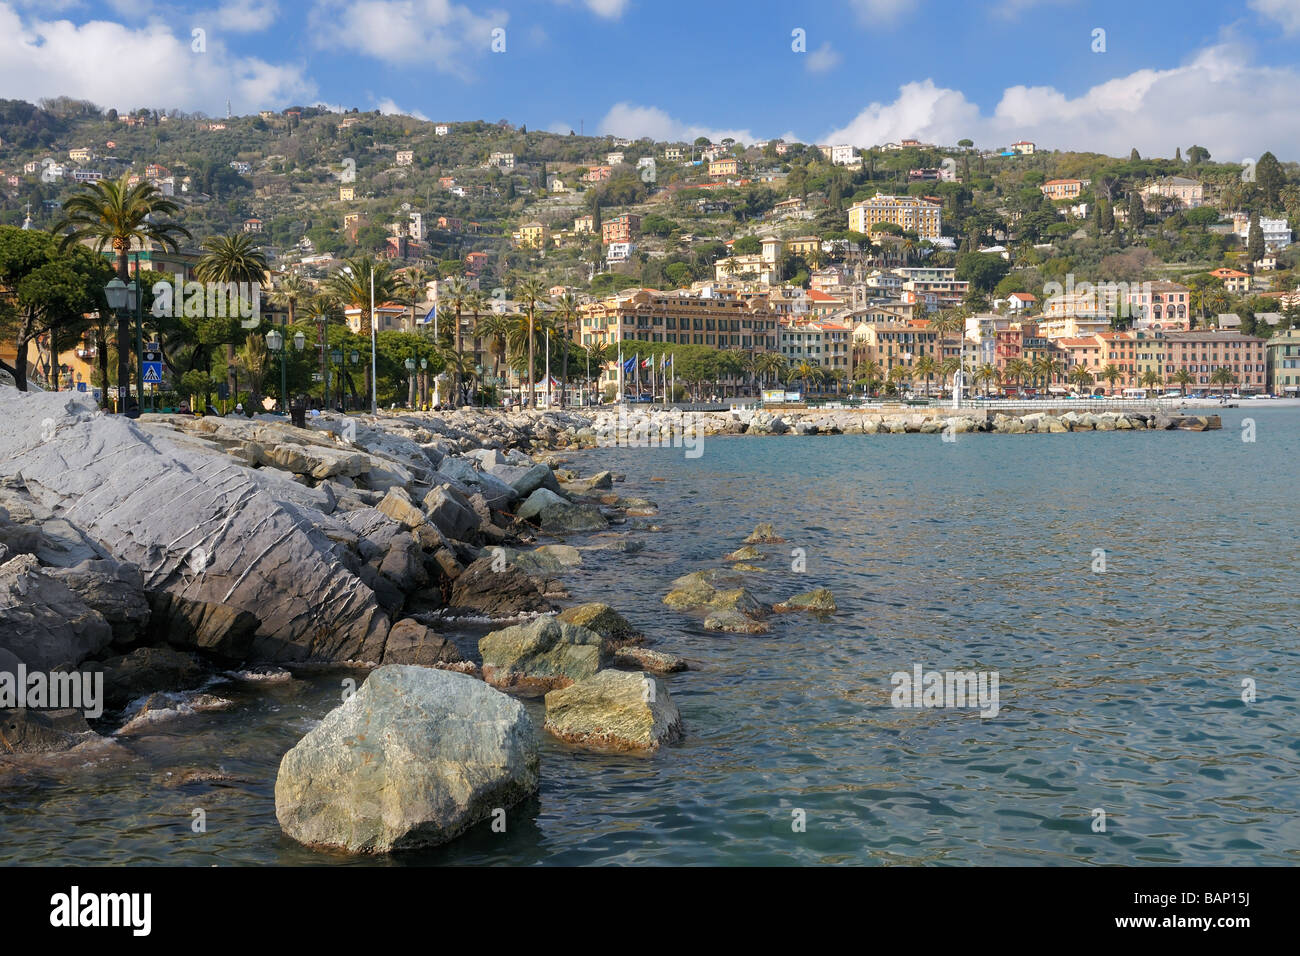 The shoreline and marina in the pictures town of Santa Margherita Ligure, Liguria, Italy. Stock Photo